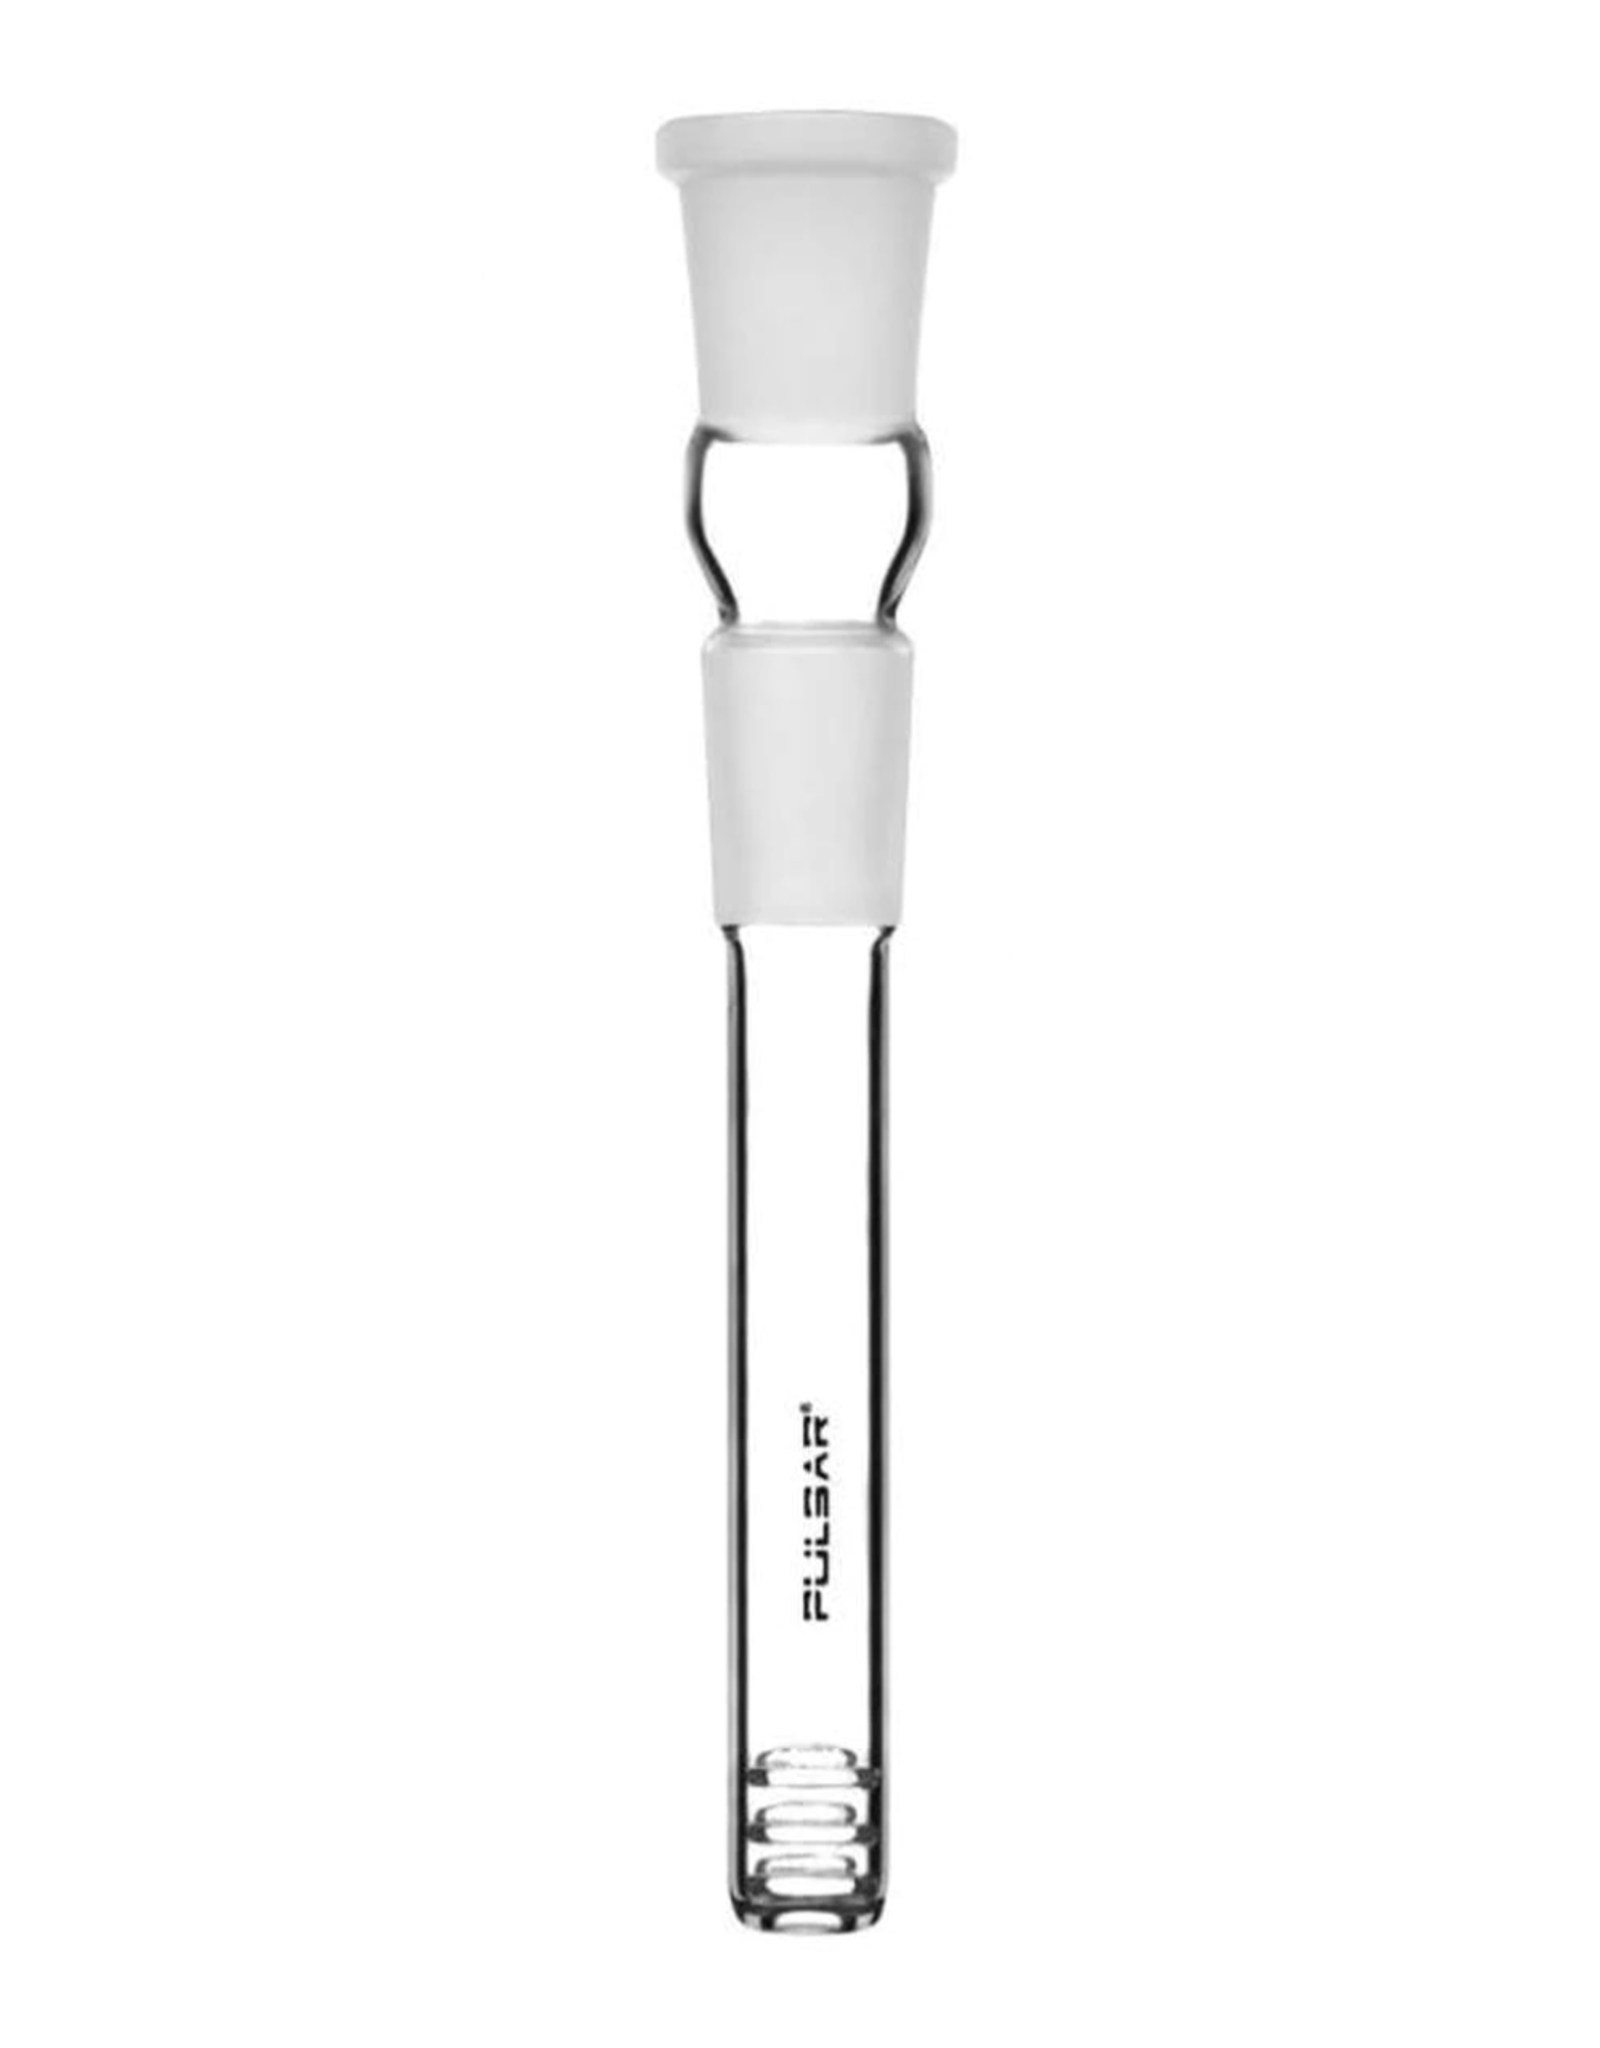 Pulsar 3.5" Diffused Downstem 14mm Male to Female by Pulsar